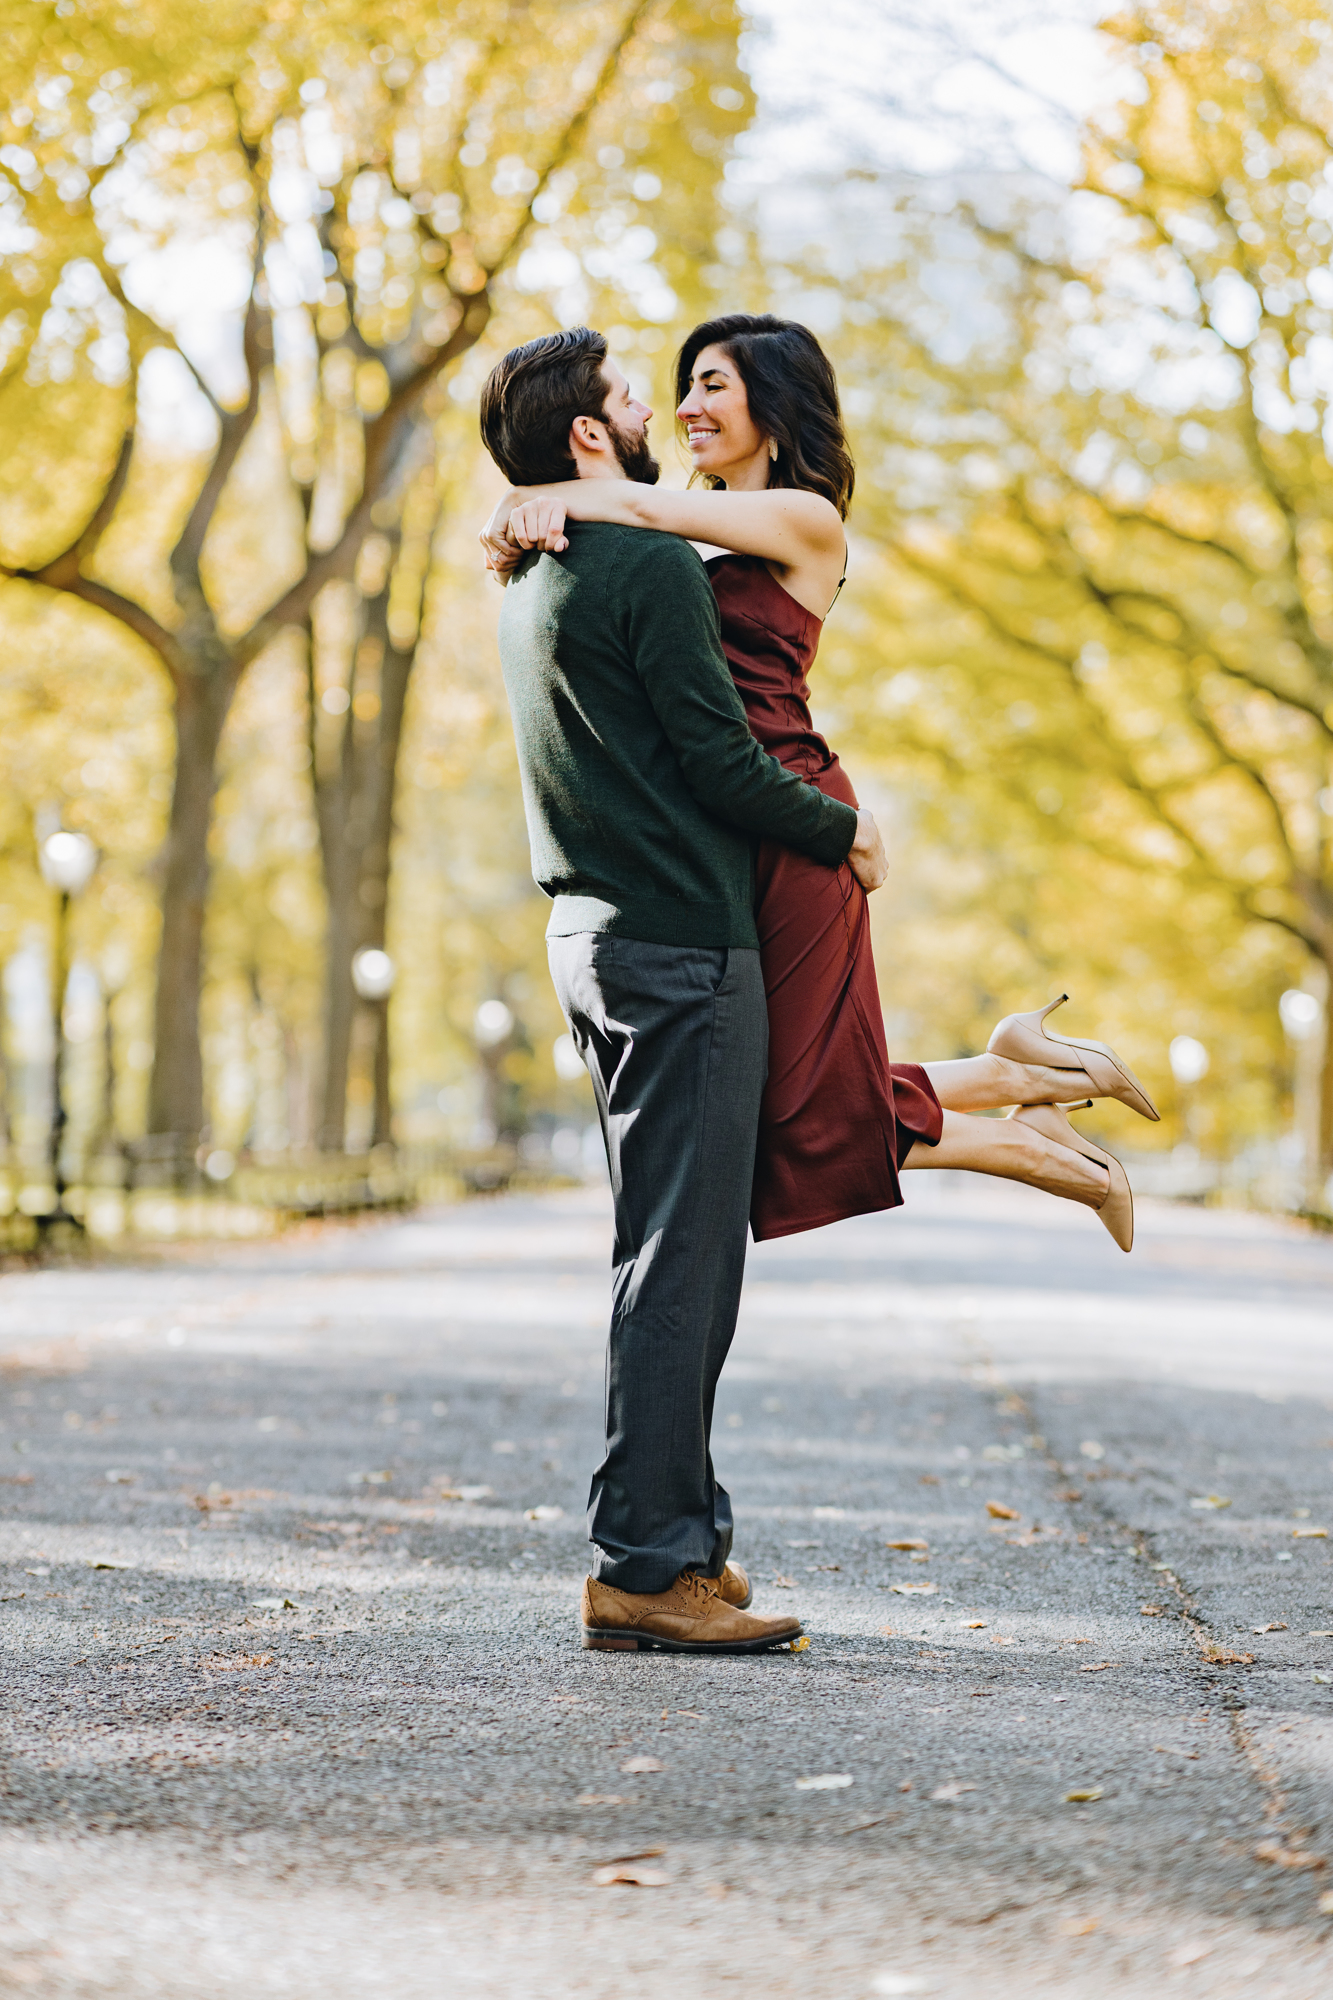 Picturesque Central Park Engagement Photos in Fall